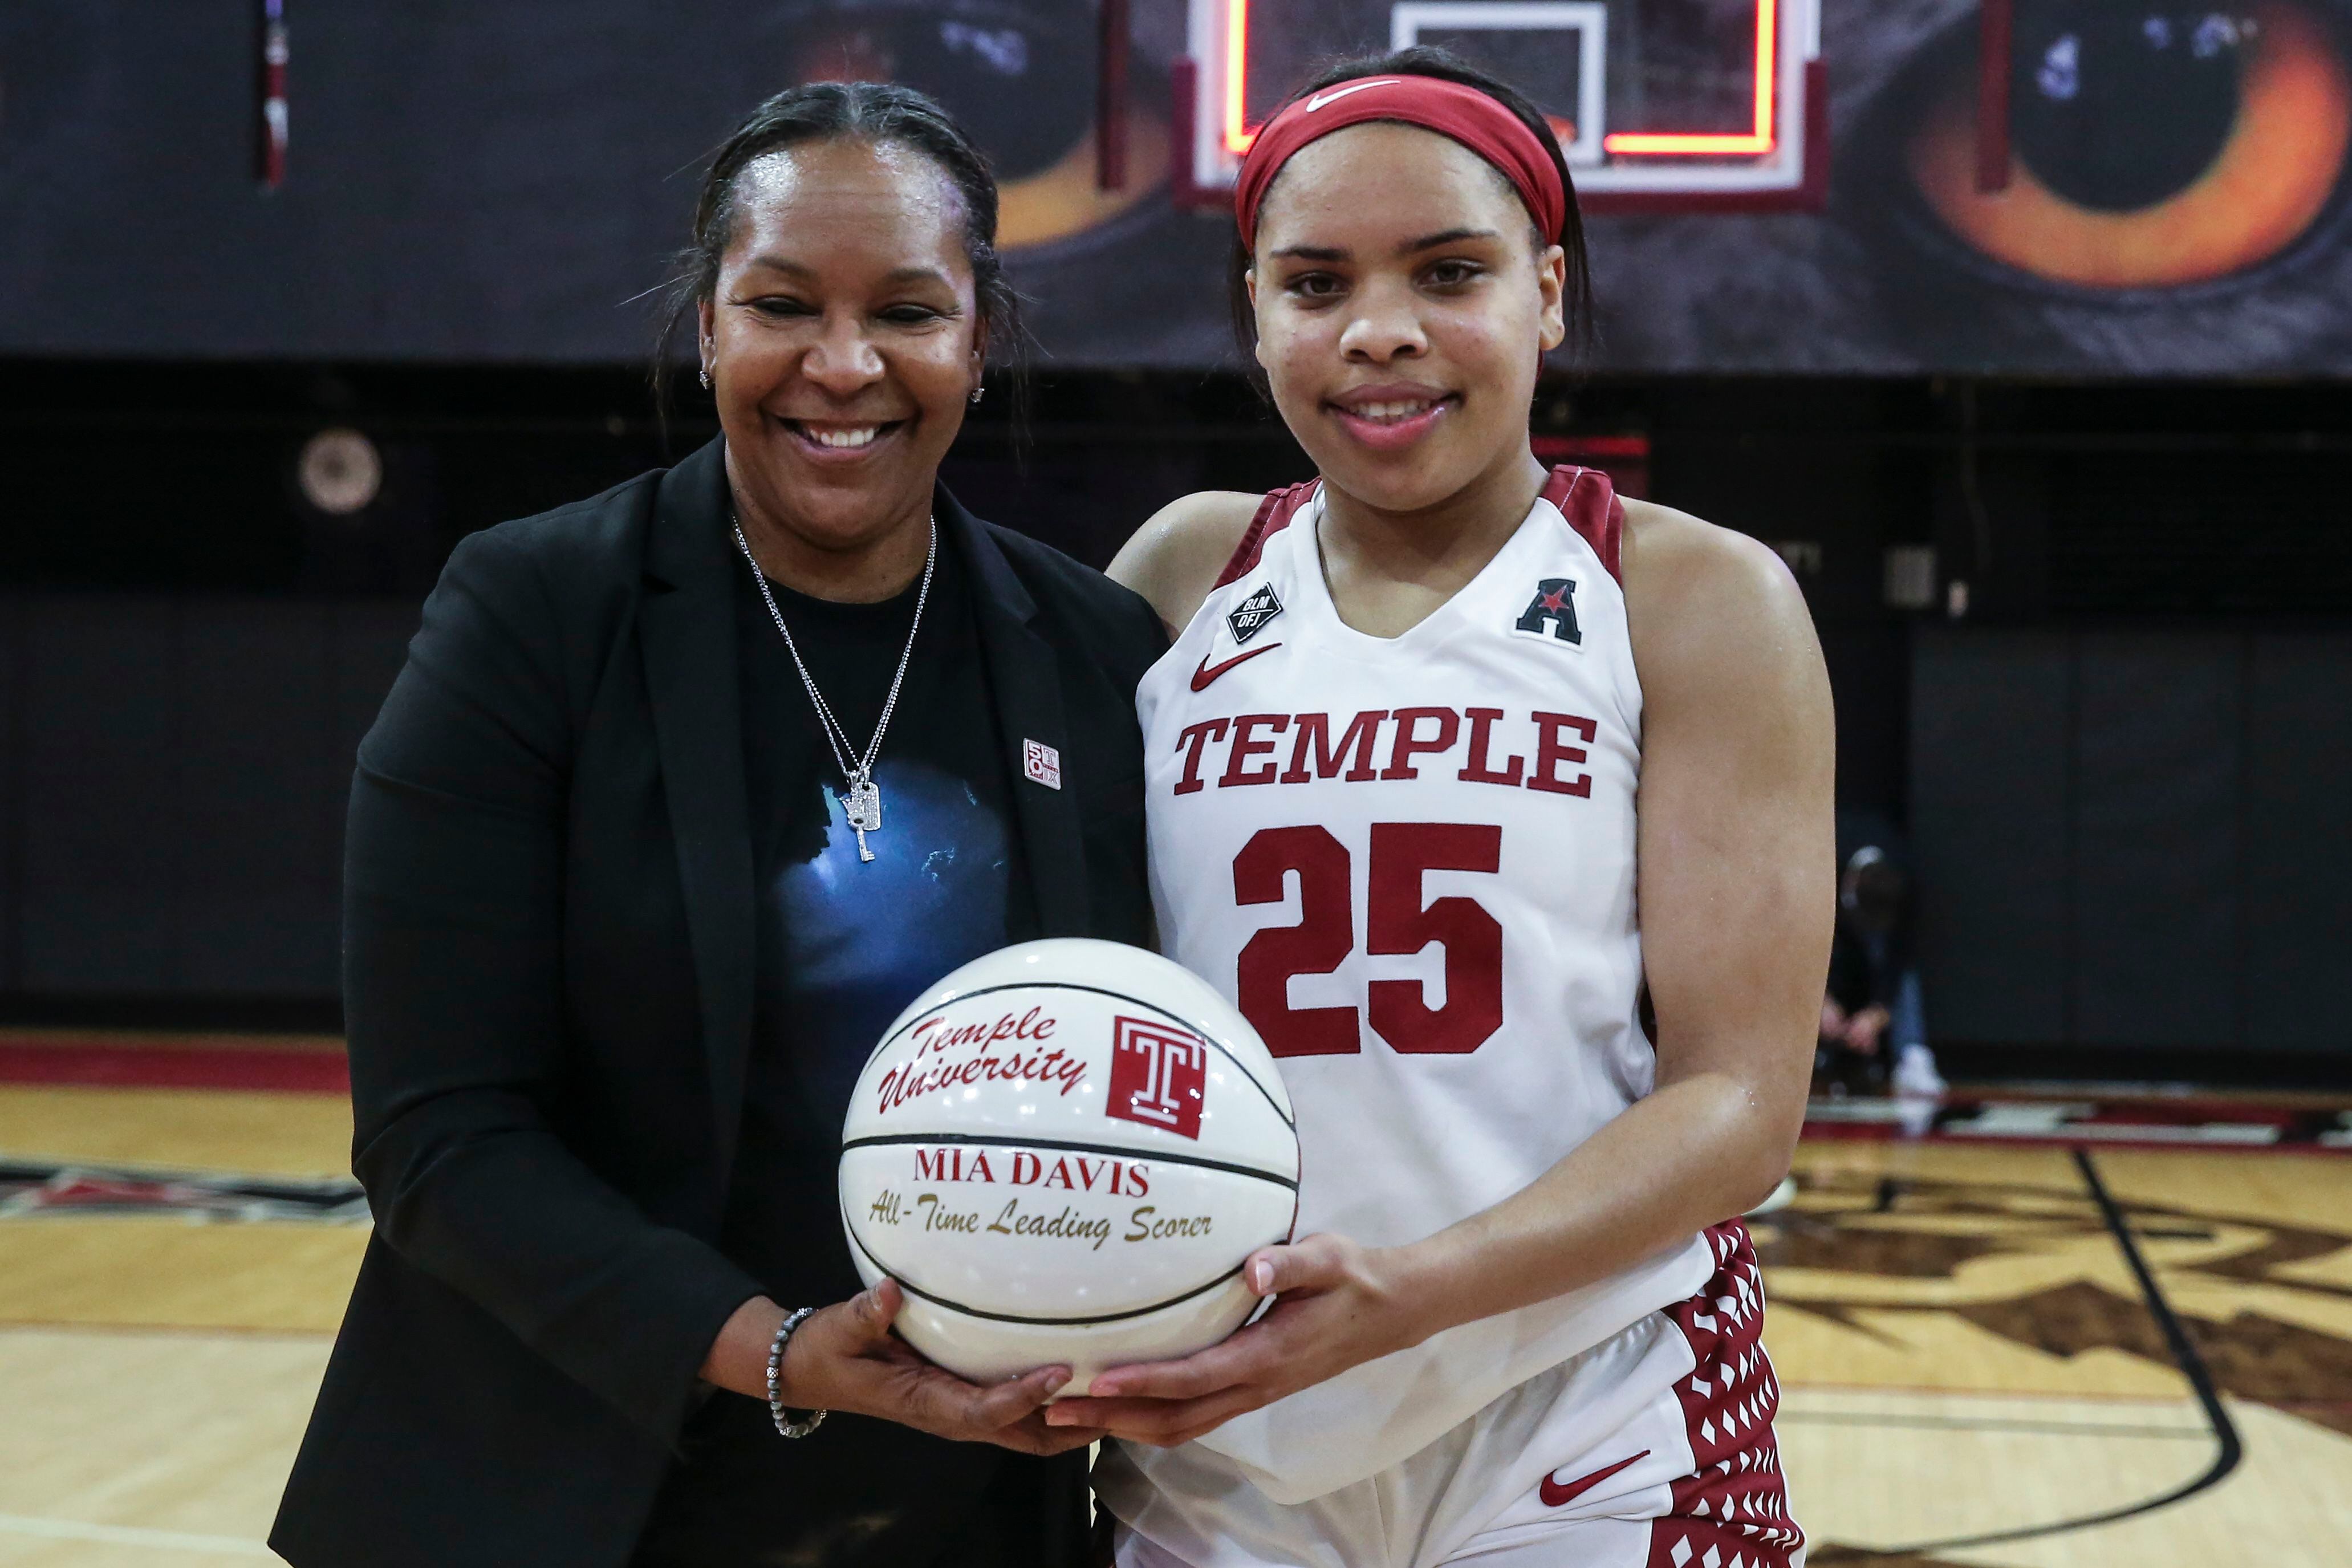 Mia Davis becomes Temple's all-time leading scorer as the Owls defeat  Wichita State, 70-49